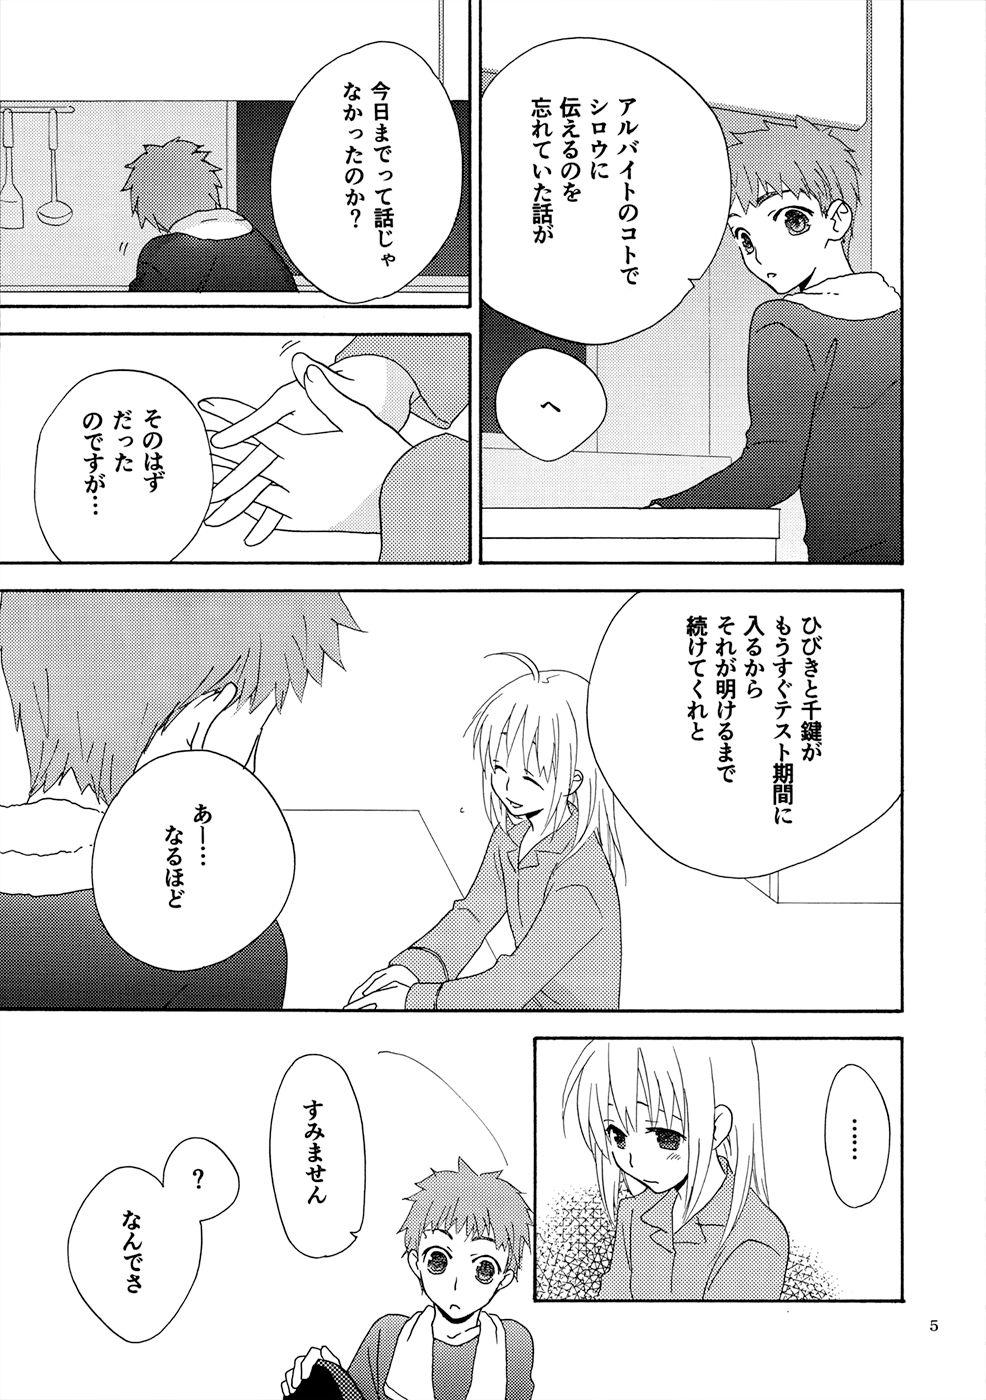 Assfingering POP STAR - Fate stay night Pink - Page 4